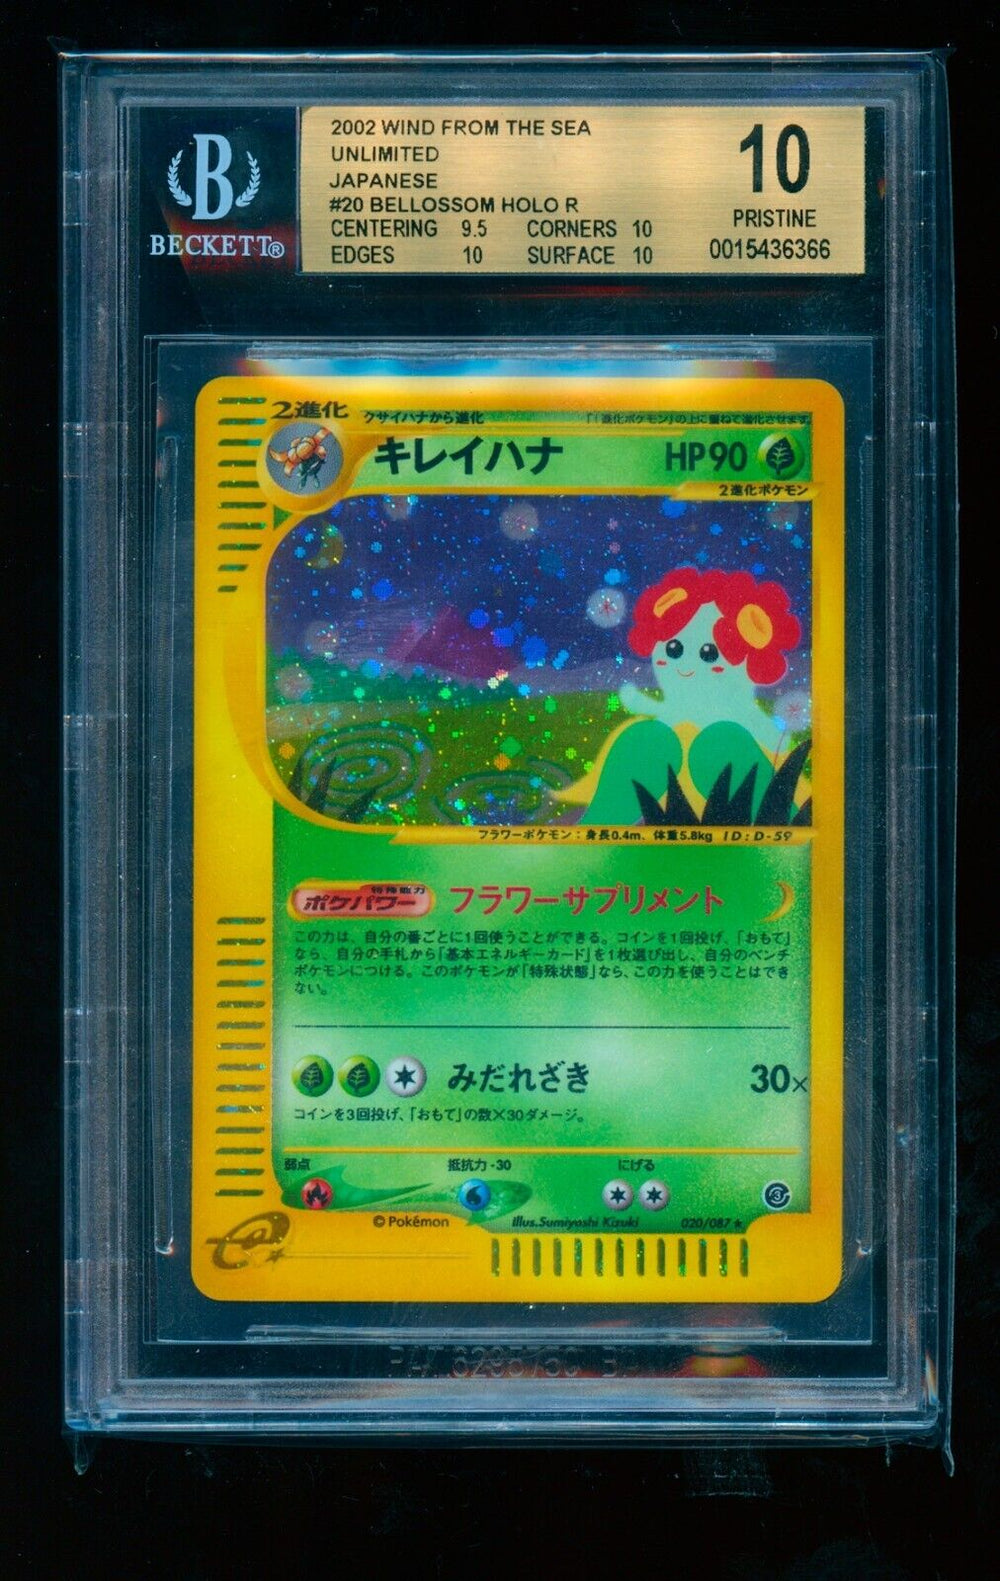 2002 Pokémon Japanese Wind From the Sea Unlimited #20 Bellossom BGS 10